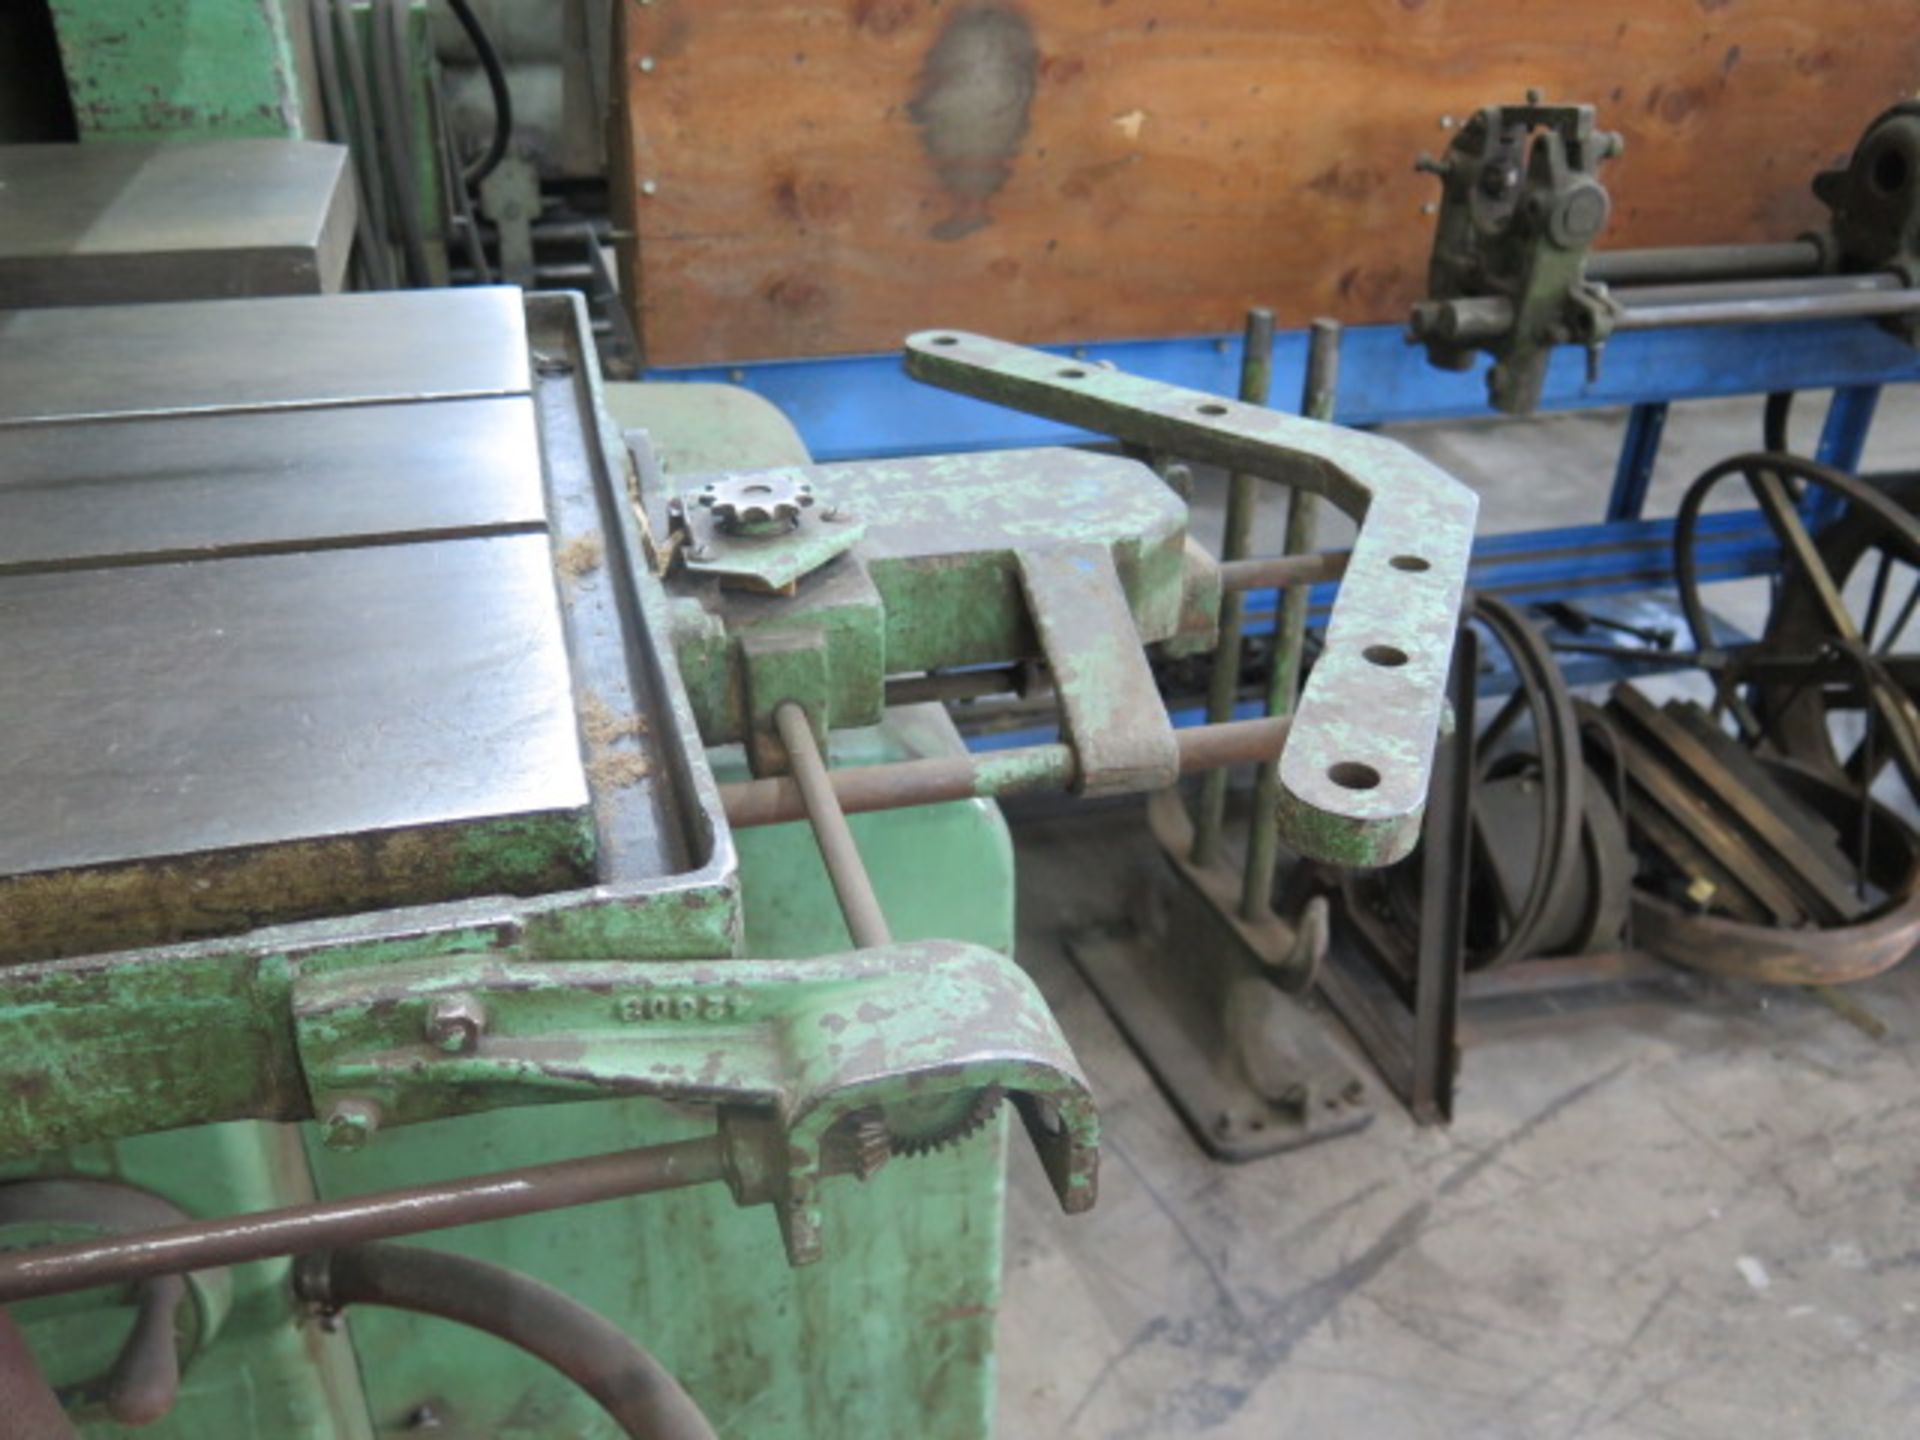 DoAll 36-3 36” Vertical Band Saw s/n 53-56296 w/ Blade Welder, 6000 Dial FPM, SOLD AS IS - Image 6 of 8